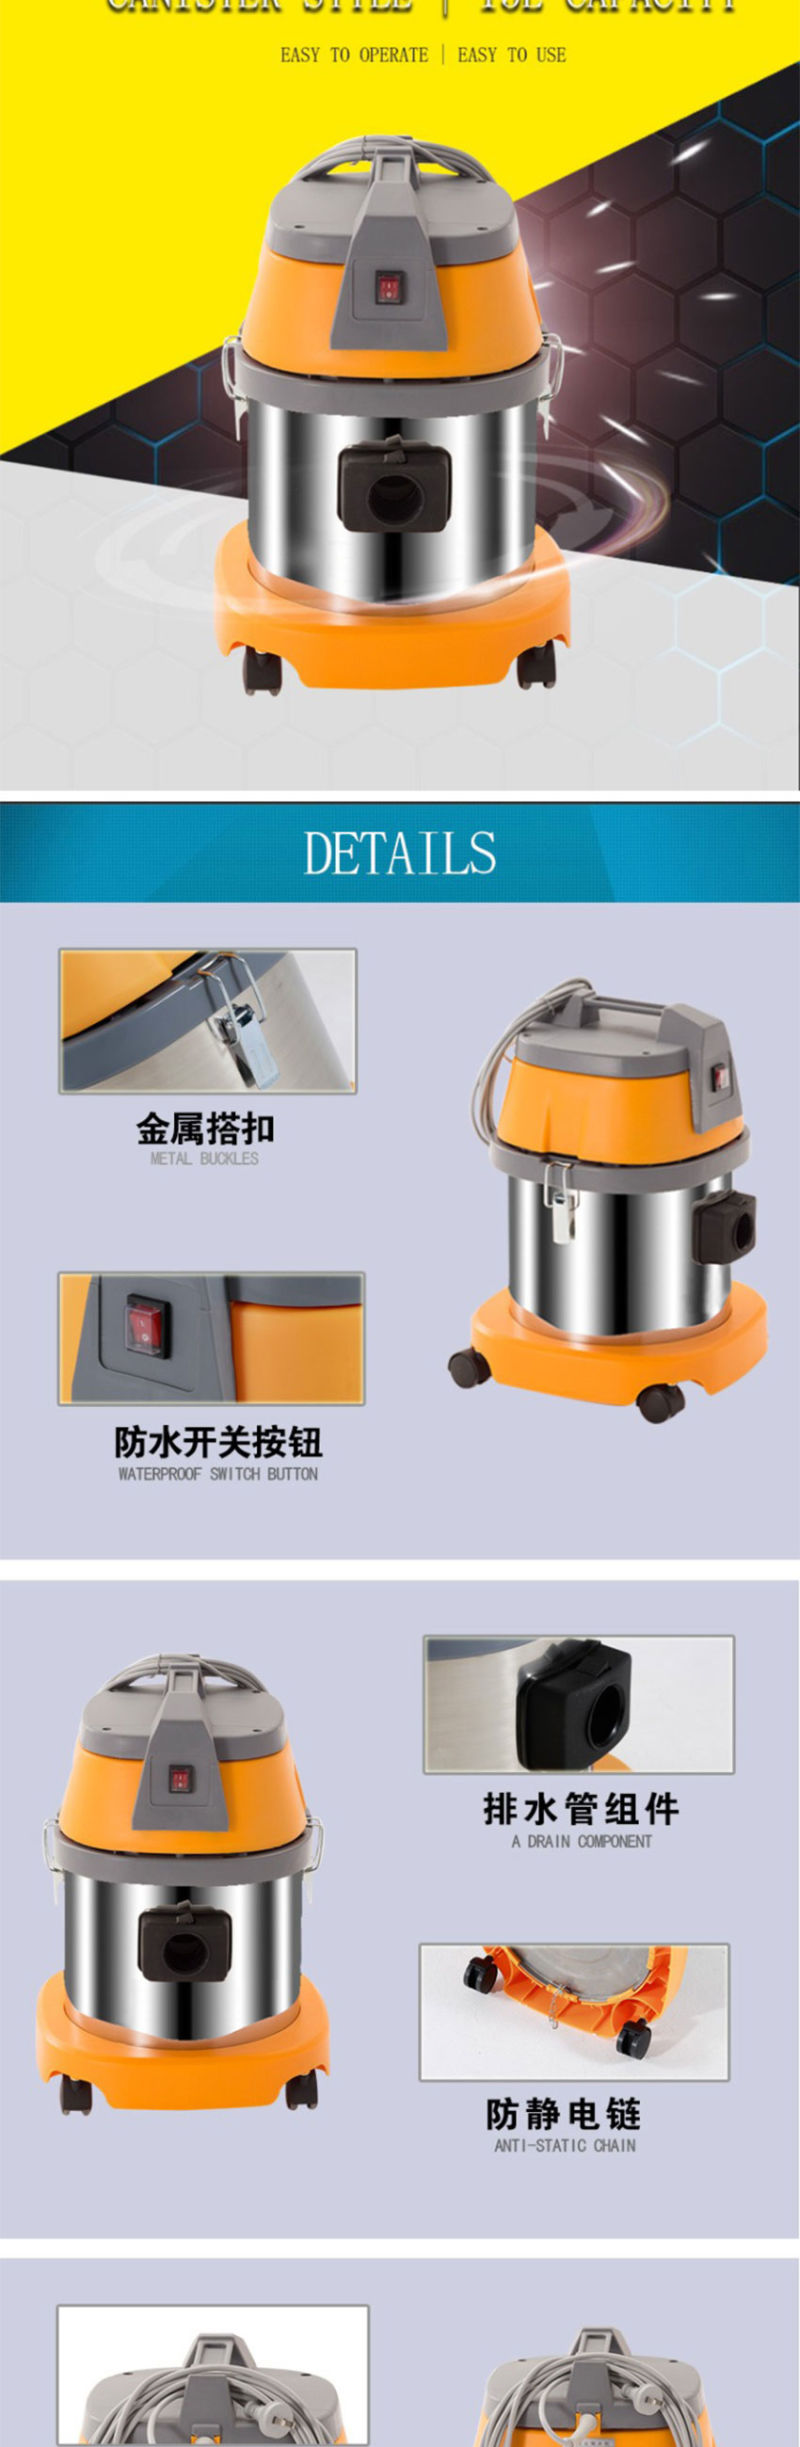 15L Commercial Wet and Dry Vacuum Cleaner Household with Ss Tank for Home Concrete Carpet Floor Printer Cleaning